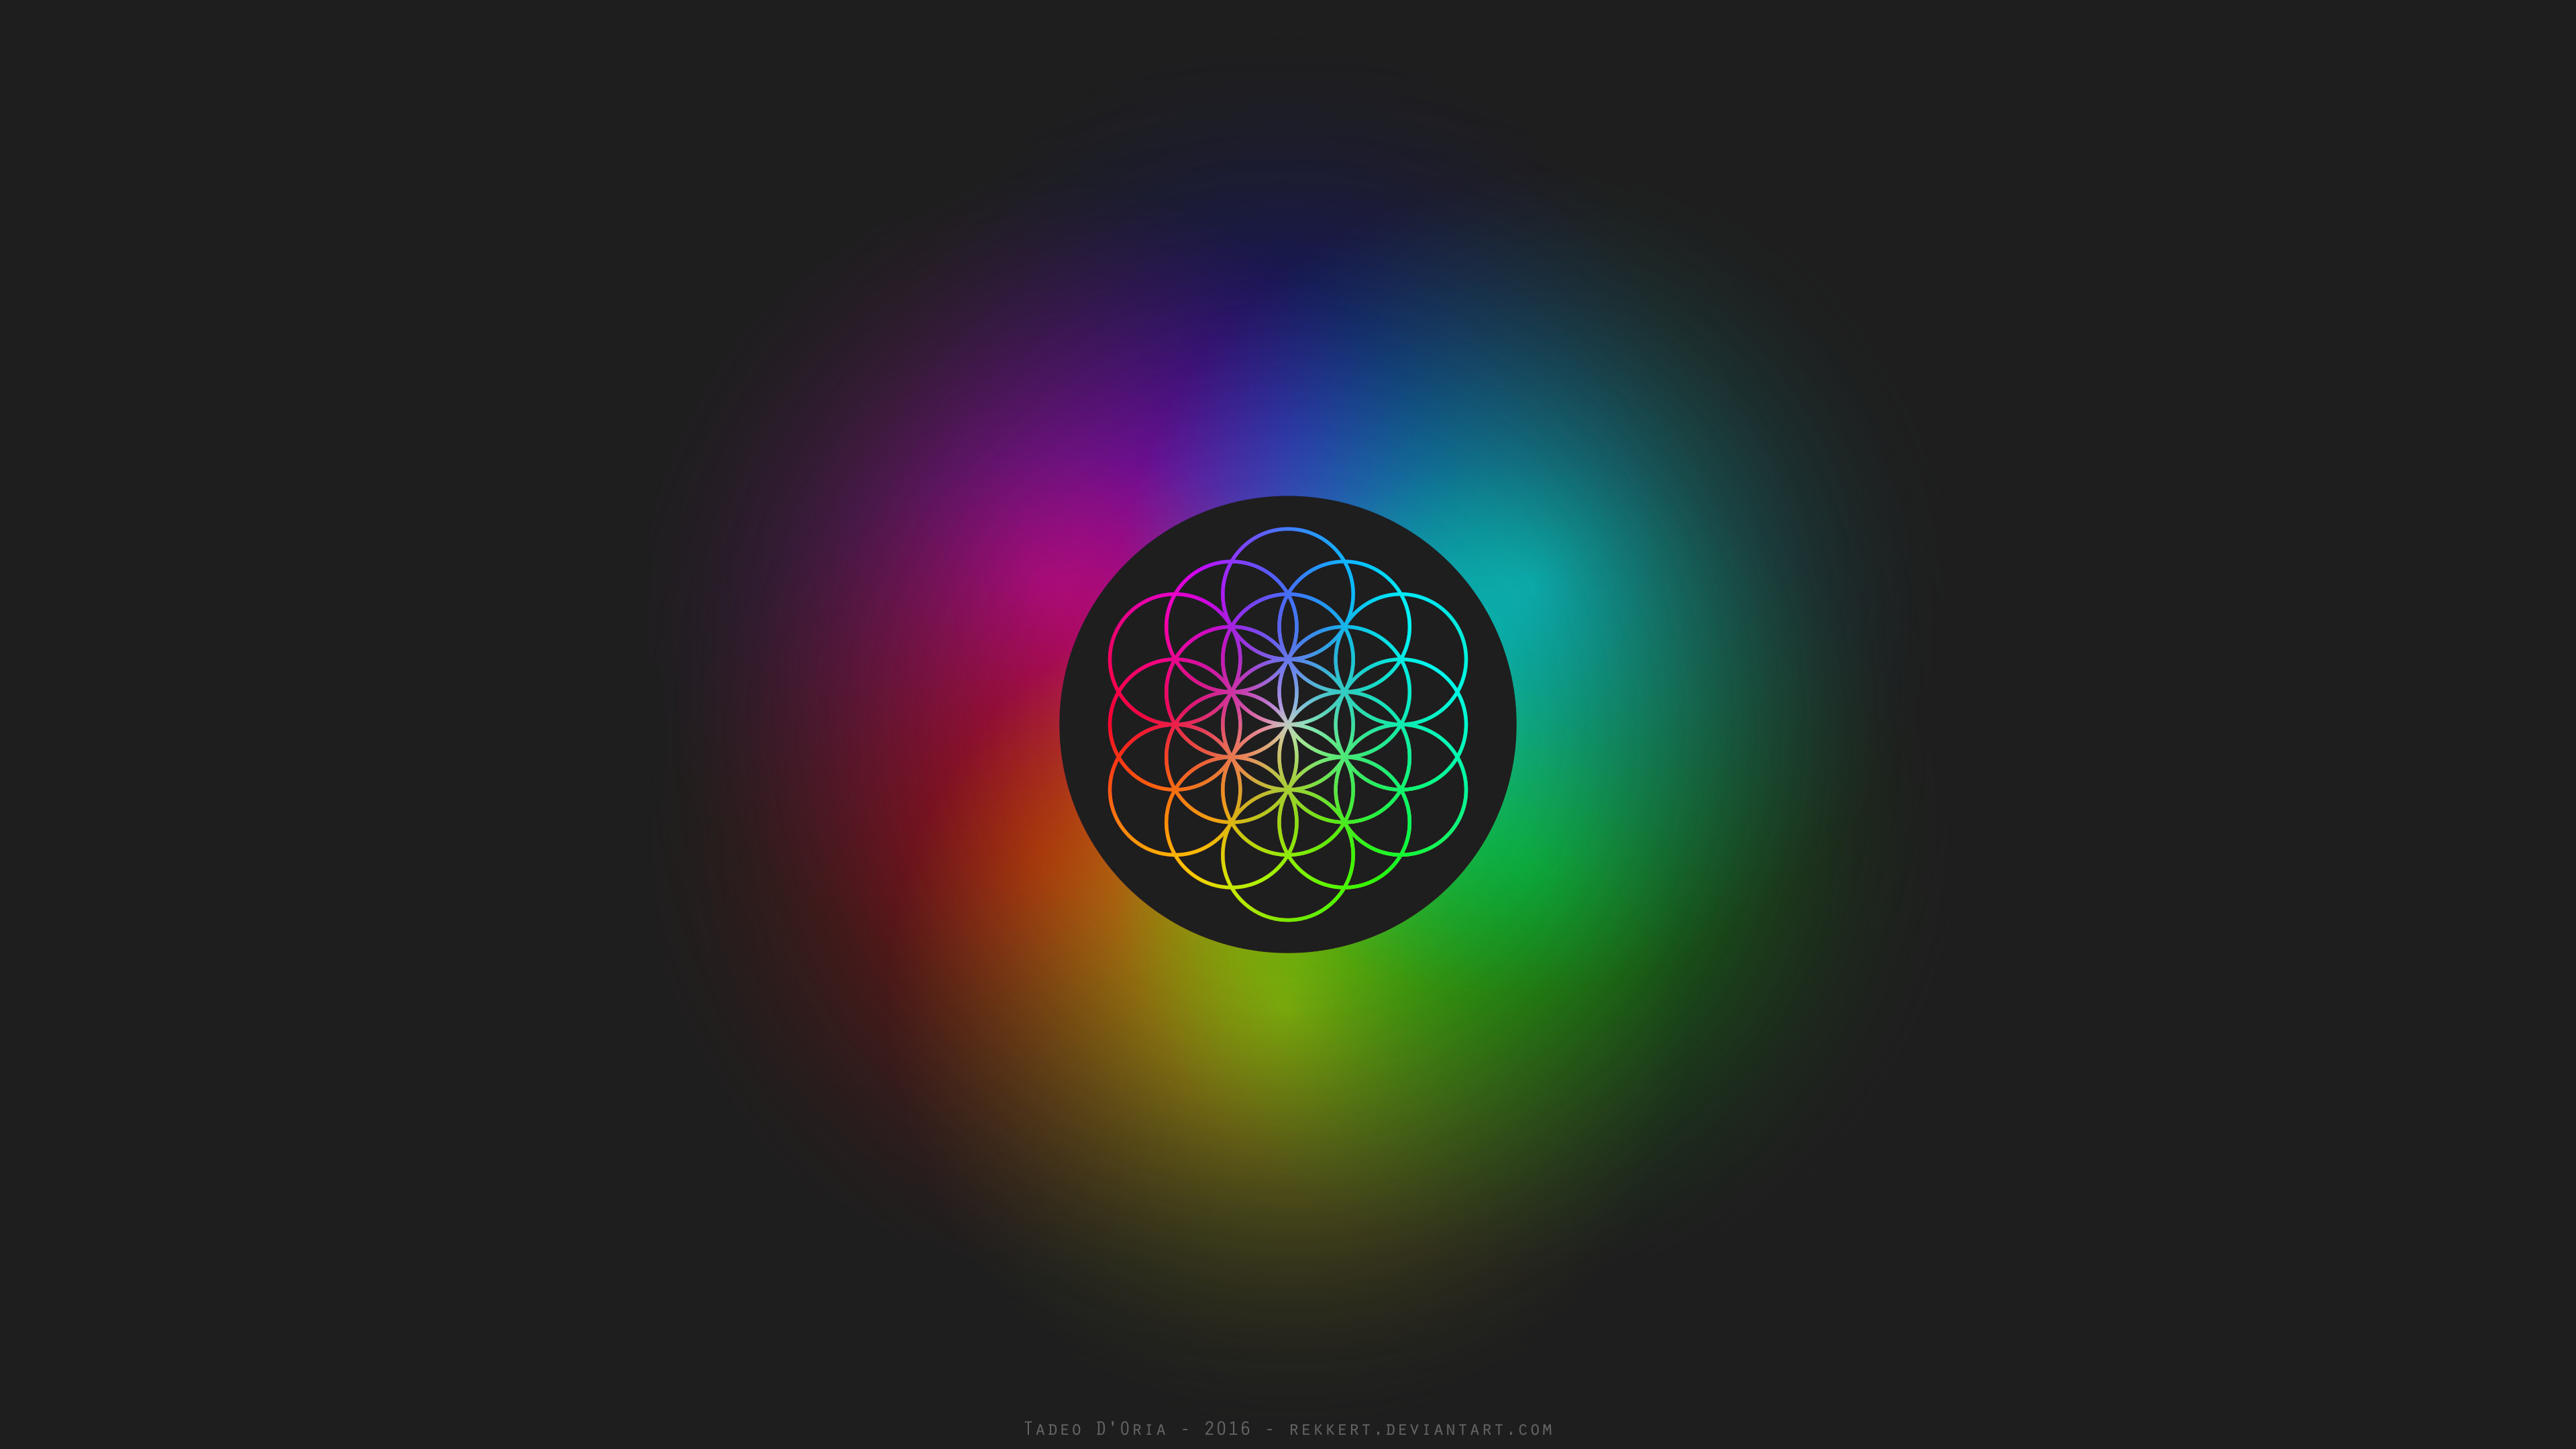 Coldplay iPhone wallpaper Coldplay Pinterest iPhone | HD Wallpapers |  Pinterest | Coldplay wallpaper, Hd wallpaper and Wallpaper